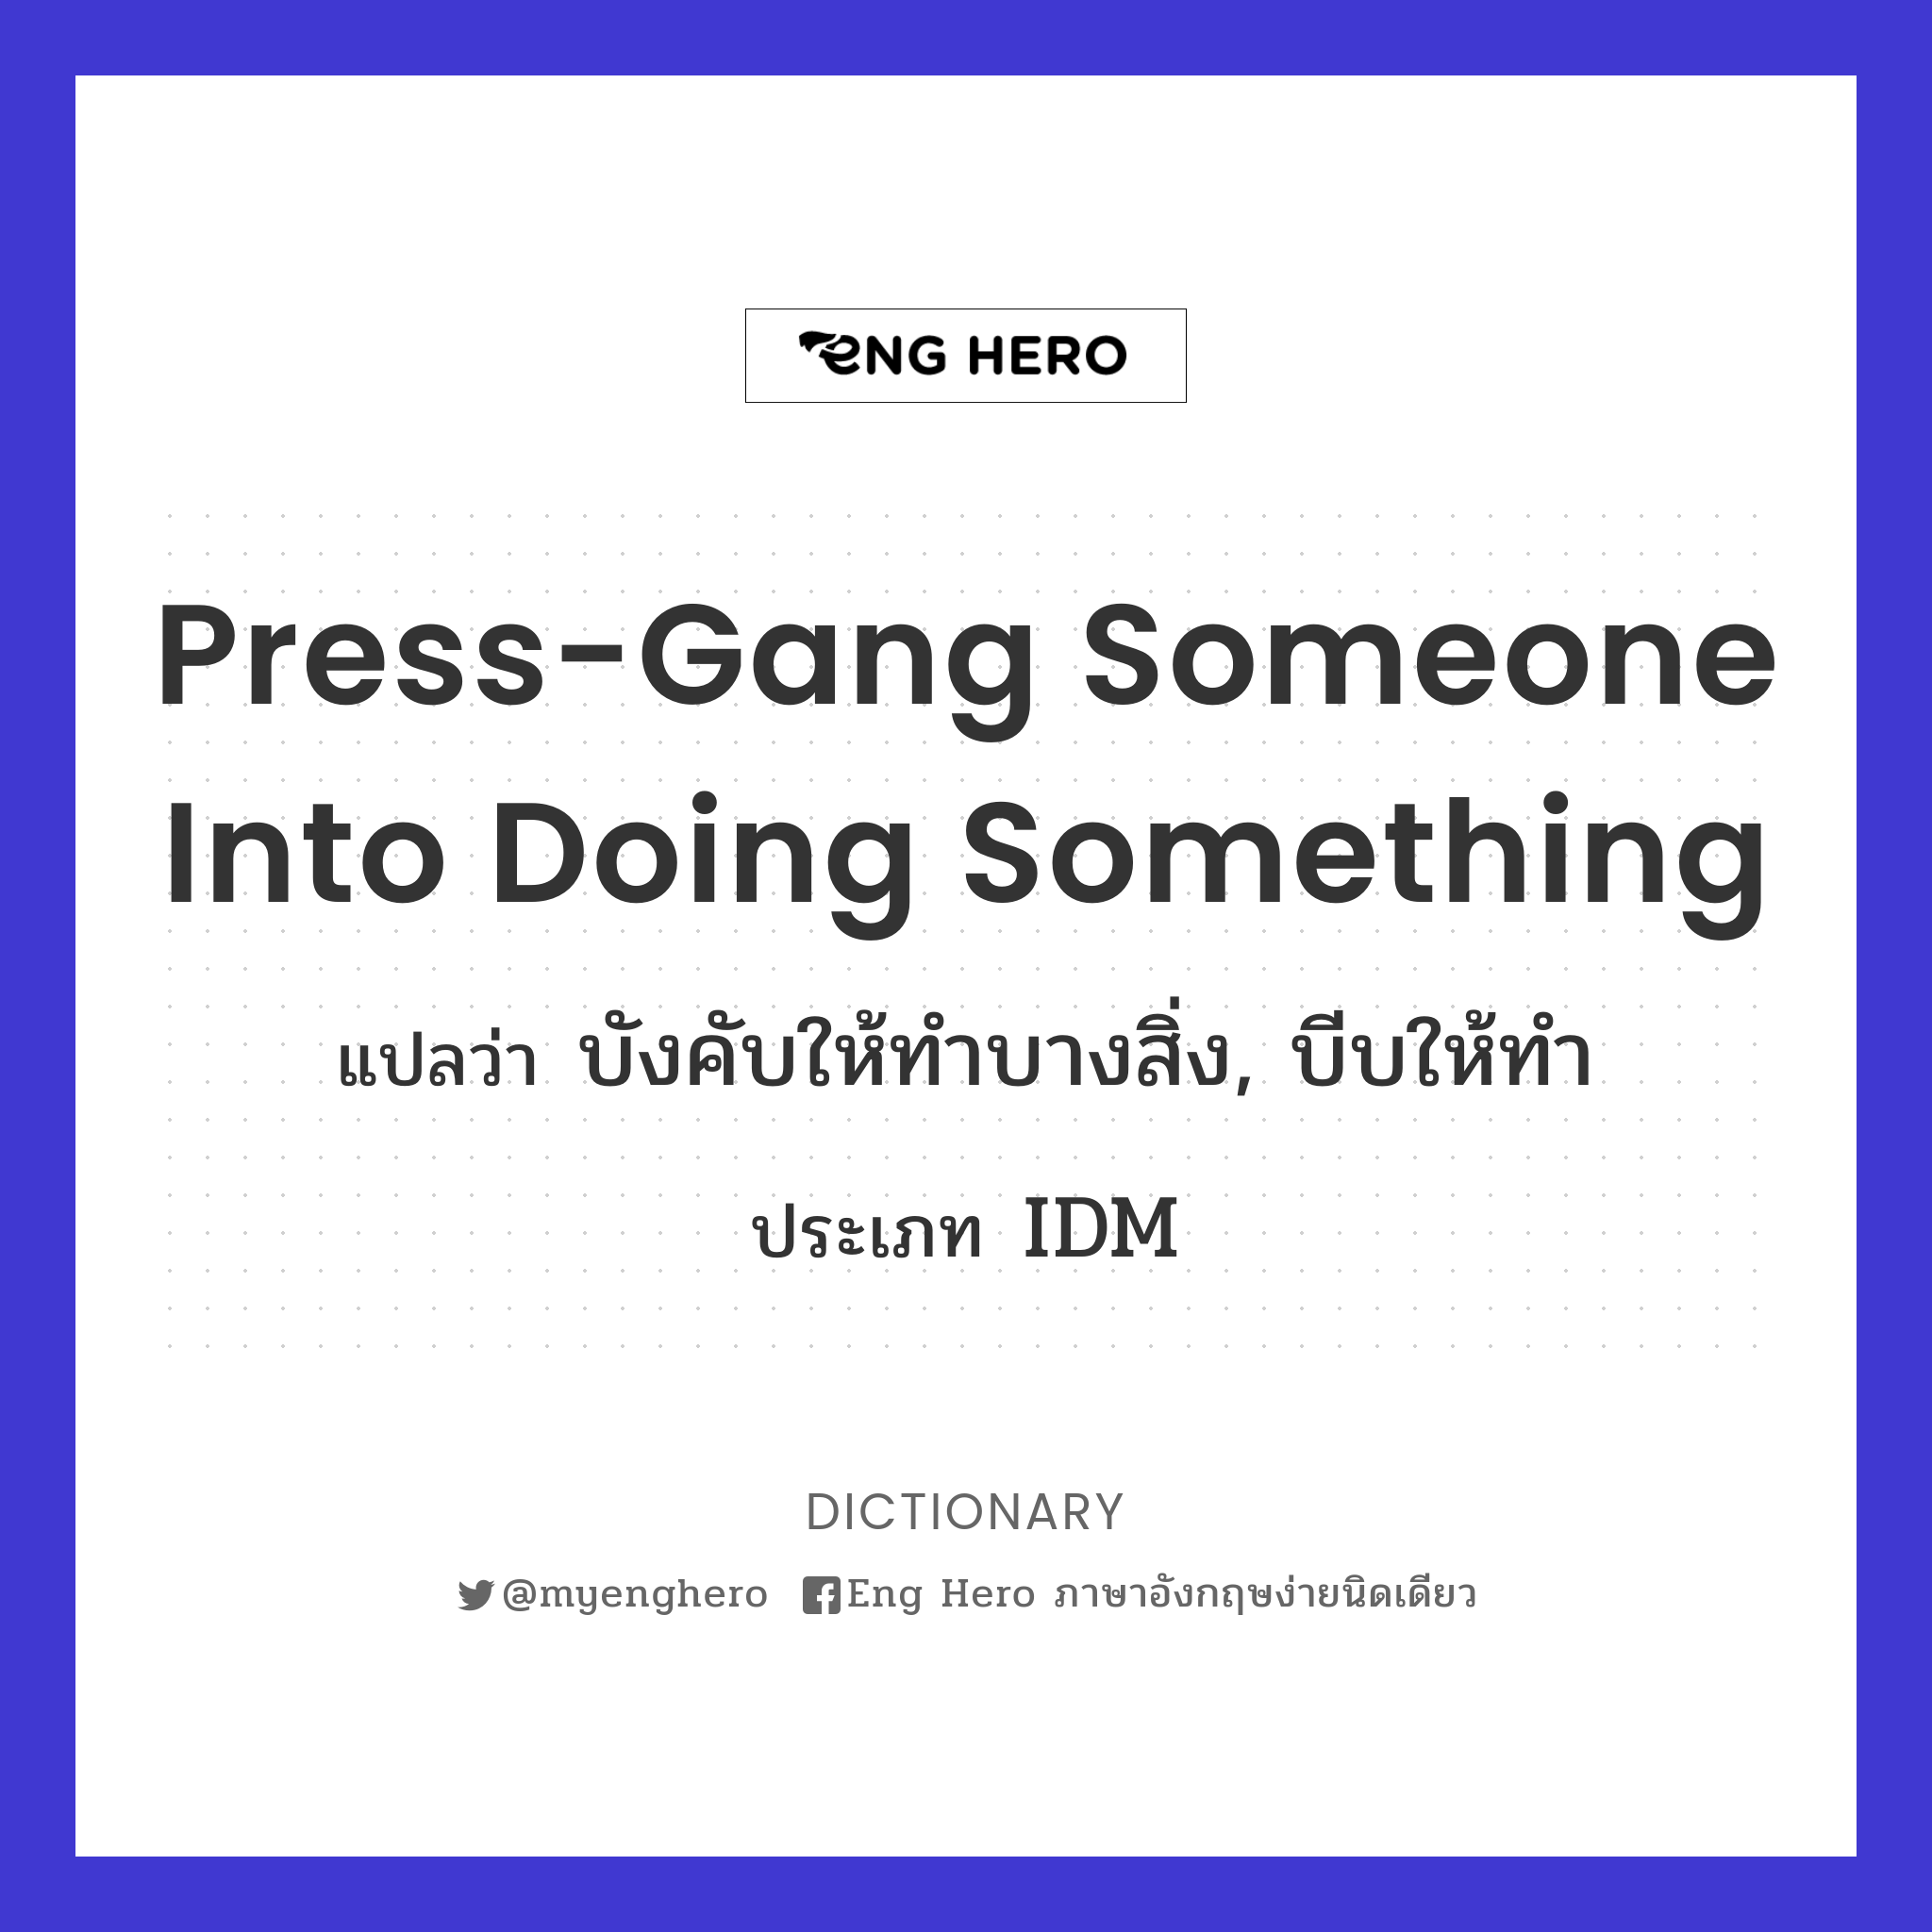 press-gang someone into doing something